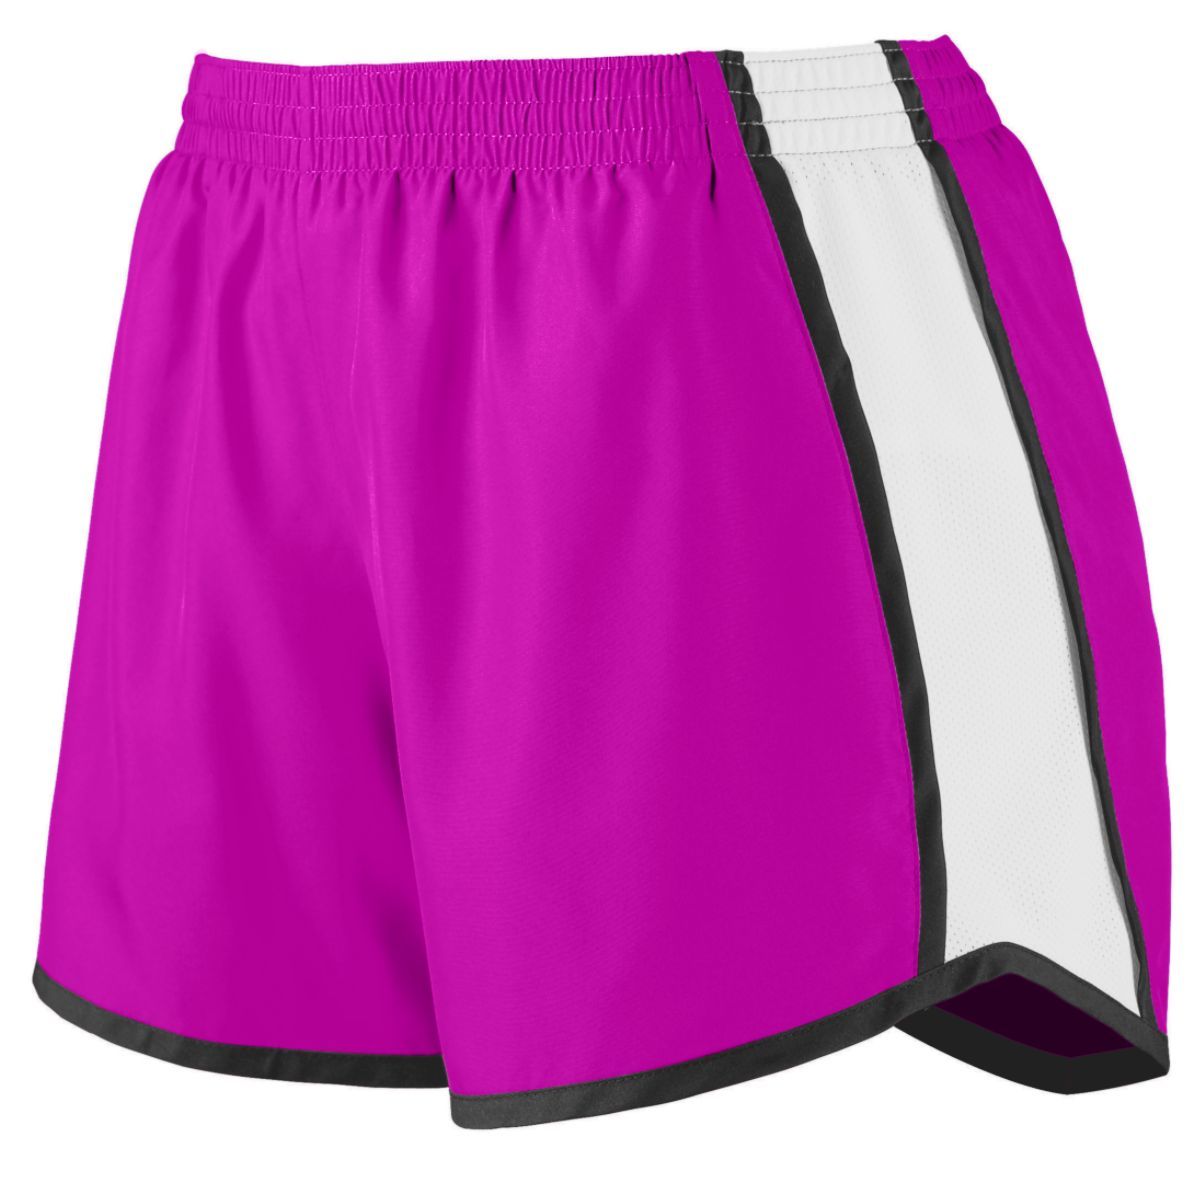 Augusta Sportswear Ladies Pulse Shorts in Power Pink/White/Black  -Part of the Ladies, Ladies-Shorts, Augusta-Products, Volleyball product lines at KanaleyCreations.com